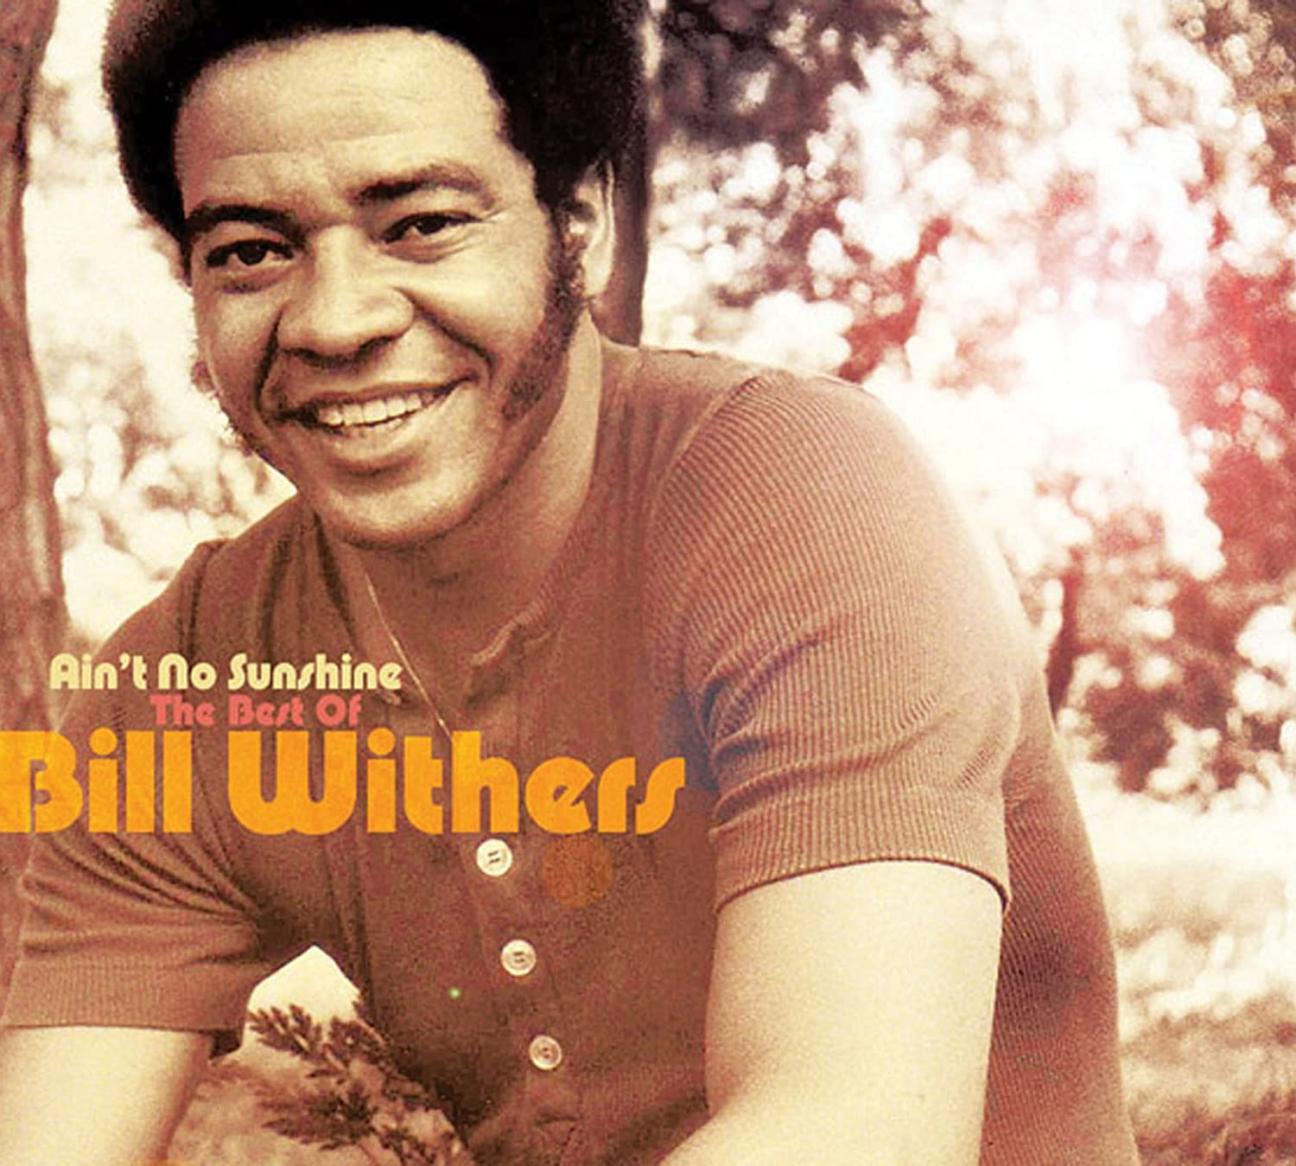 Ain't no sunshine: The best of Bill Withers